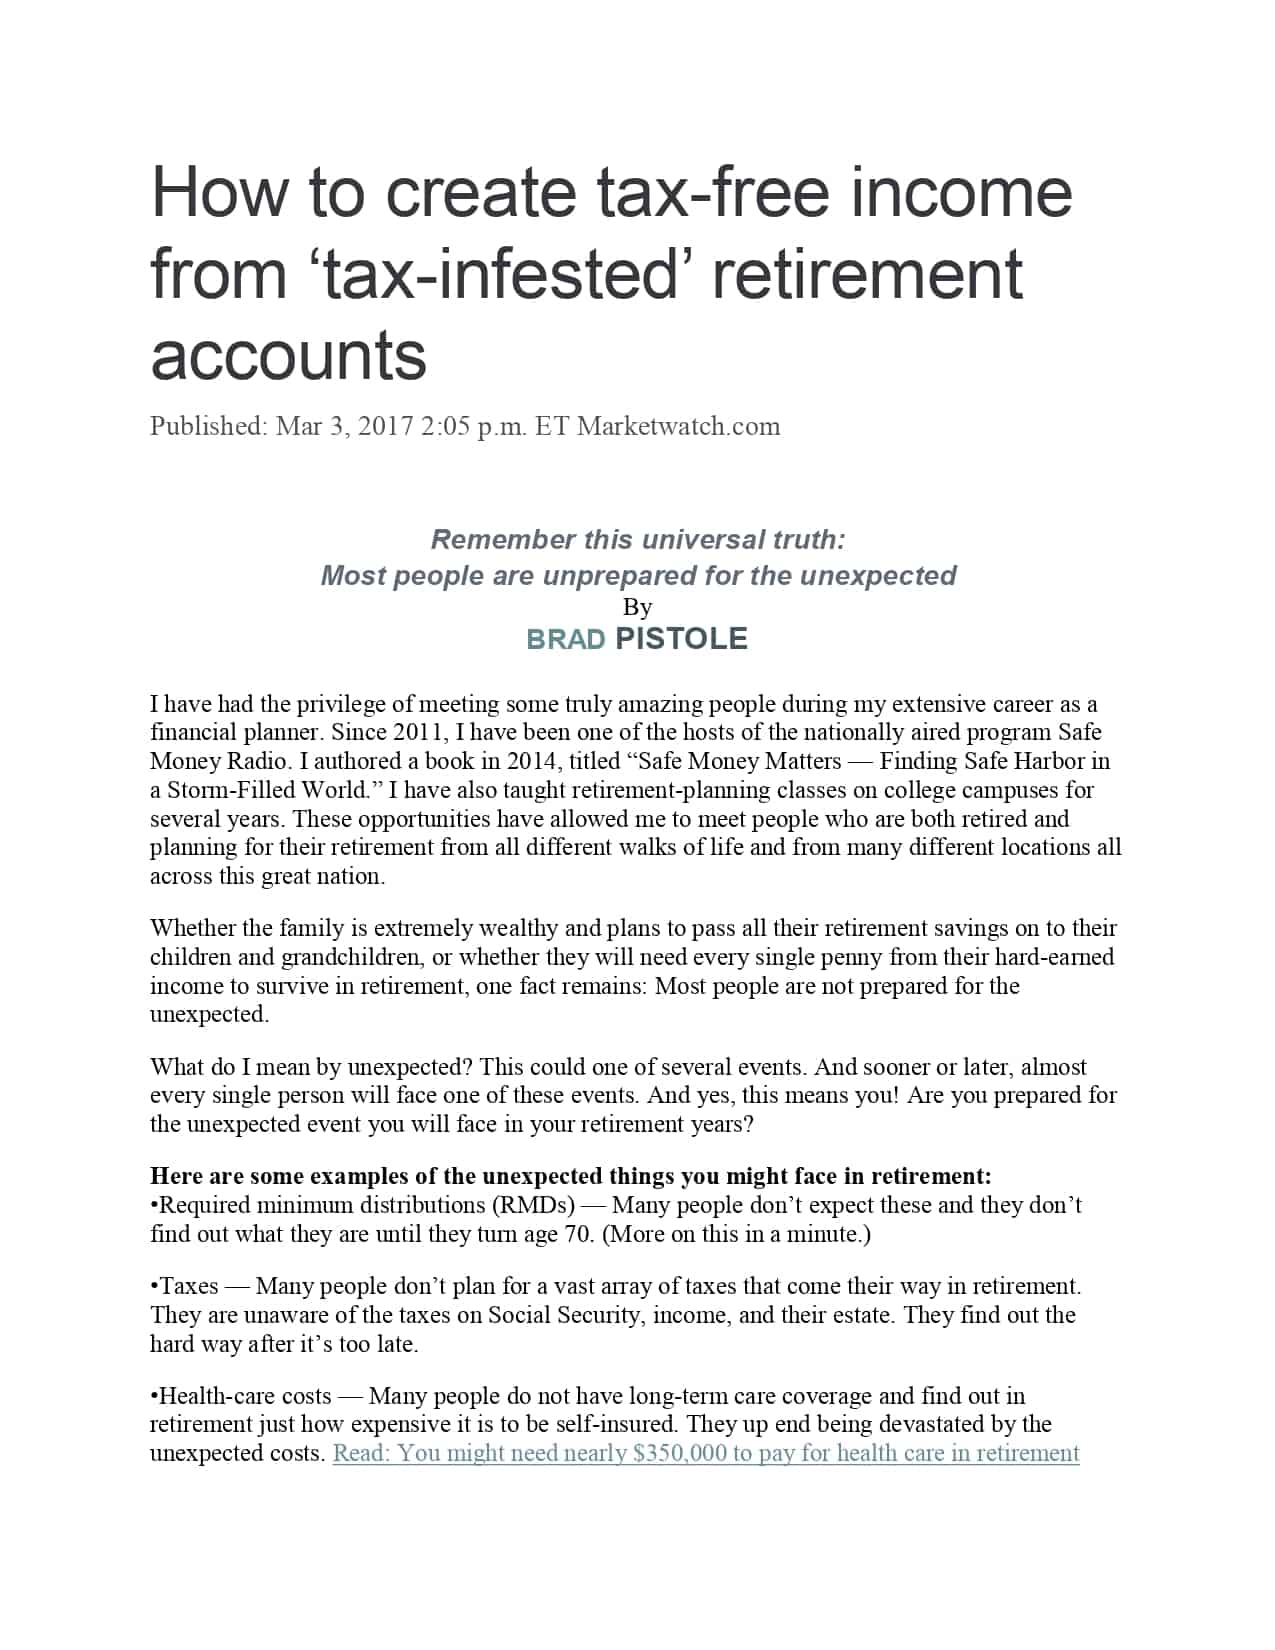 How to Create Tax-Free Income from ‘Tax-Infested’ Retirement Accounts